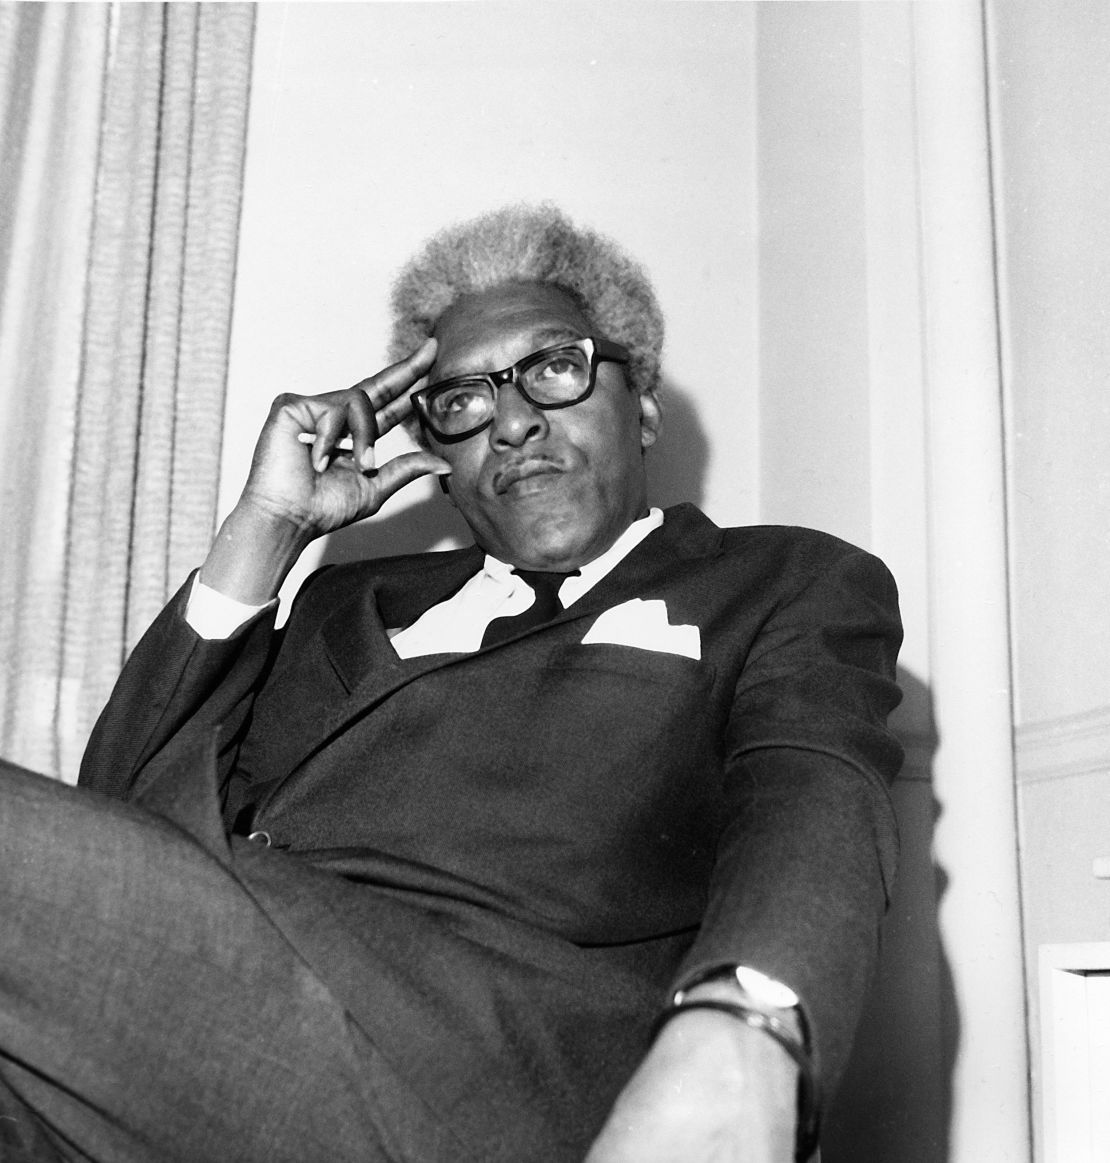 FILE - In this April 1969 file photo civil rights leader Bayard Rustin is shown in his Park Avenue South office in New York City.  Months before Martin Luther King Jr.'s "I Have a Dream" declaration galvanized a quarter-million people at the 1963 March on Washington, Rustin was planning all the essential details to keep the crowd orderly and engaged. A Quaker, and a pacifist, Rustin served as chief strategist for King's march over the objections of some leaders, but was kept mostly in the background with some organizers considering him a liability. Notably, he was gay in an era when same-sex relations were widely reviled in American society. He died in 1987, and is sometimes forgotten in civil rights history. (AP Photo/A. Camerano)